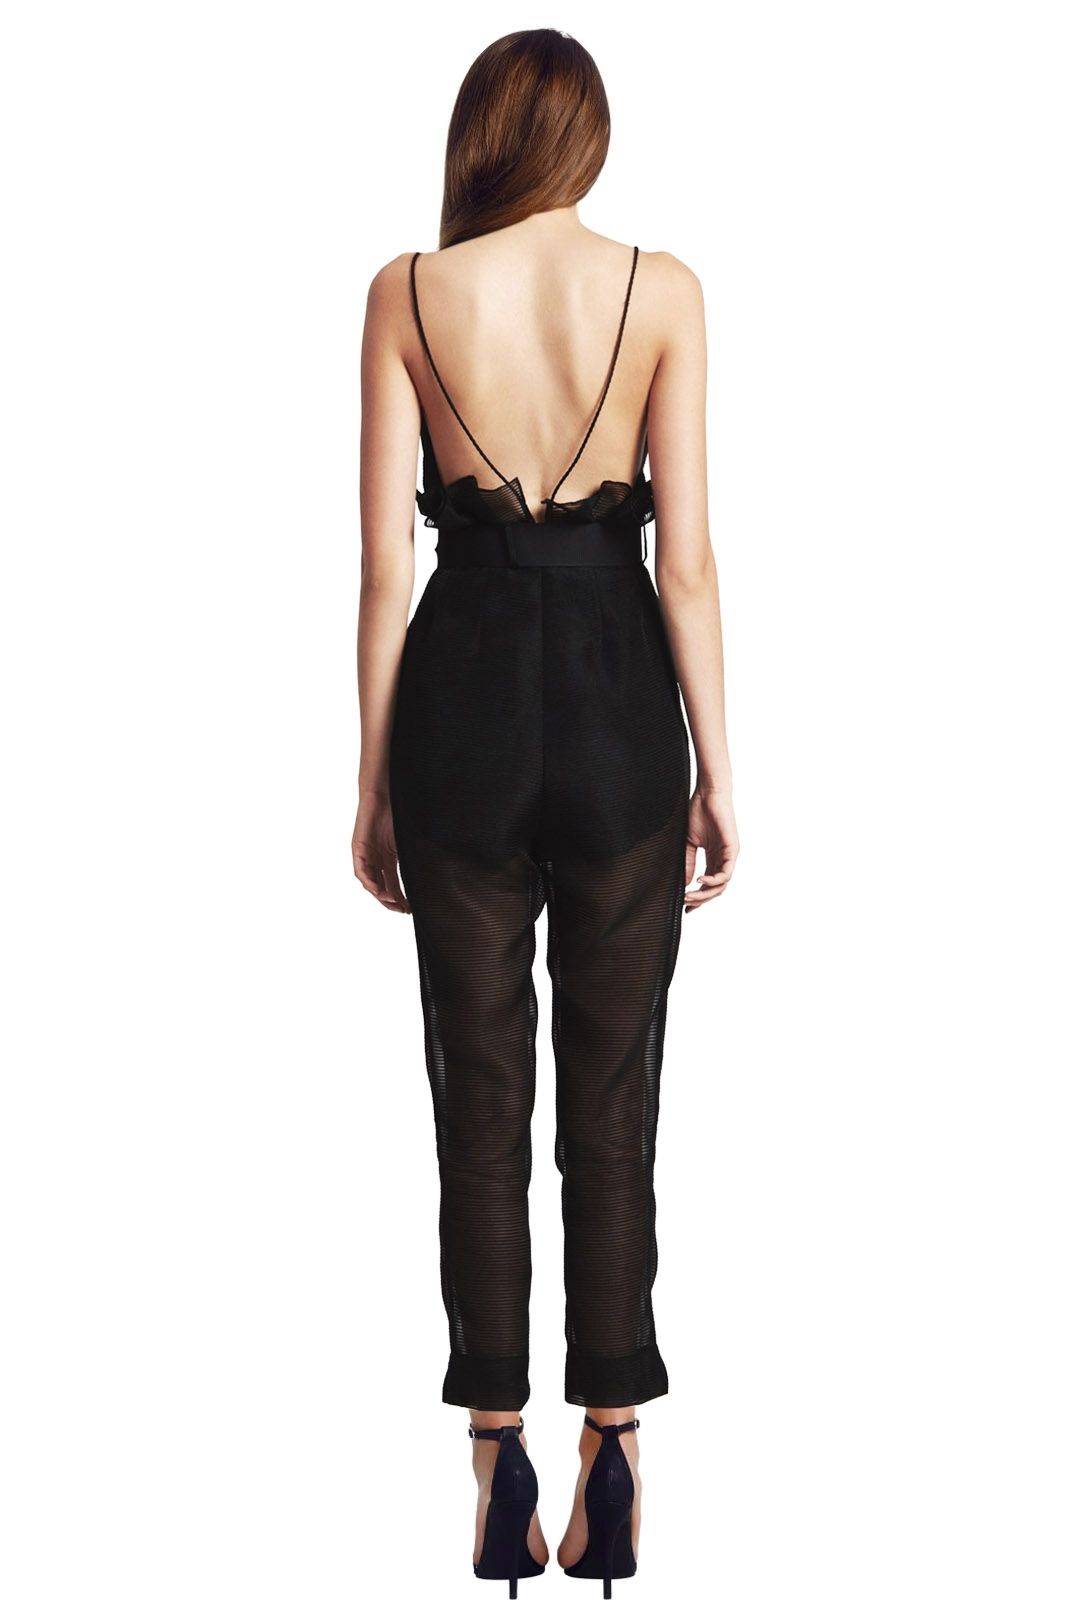 Alice McCall - Justify My Love Jumpsuit - Black - Back